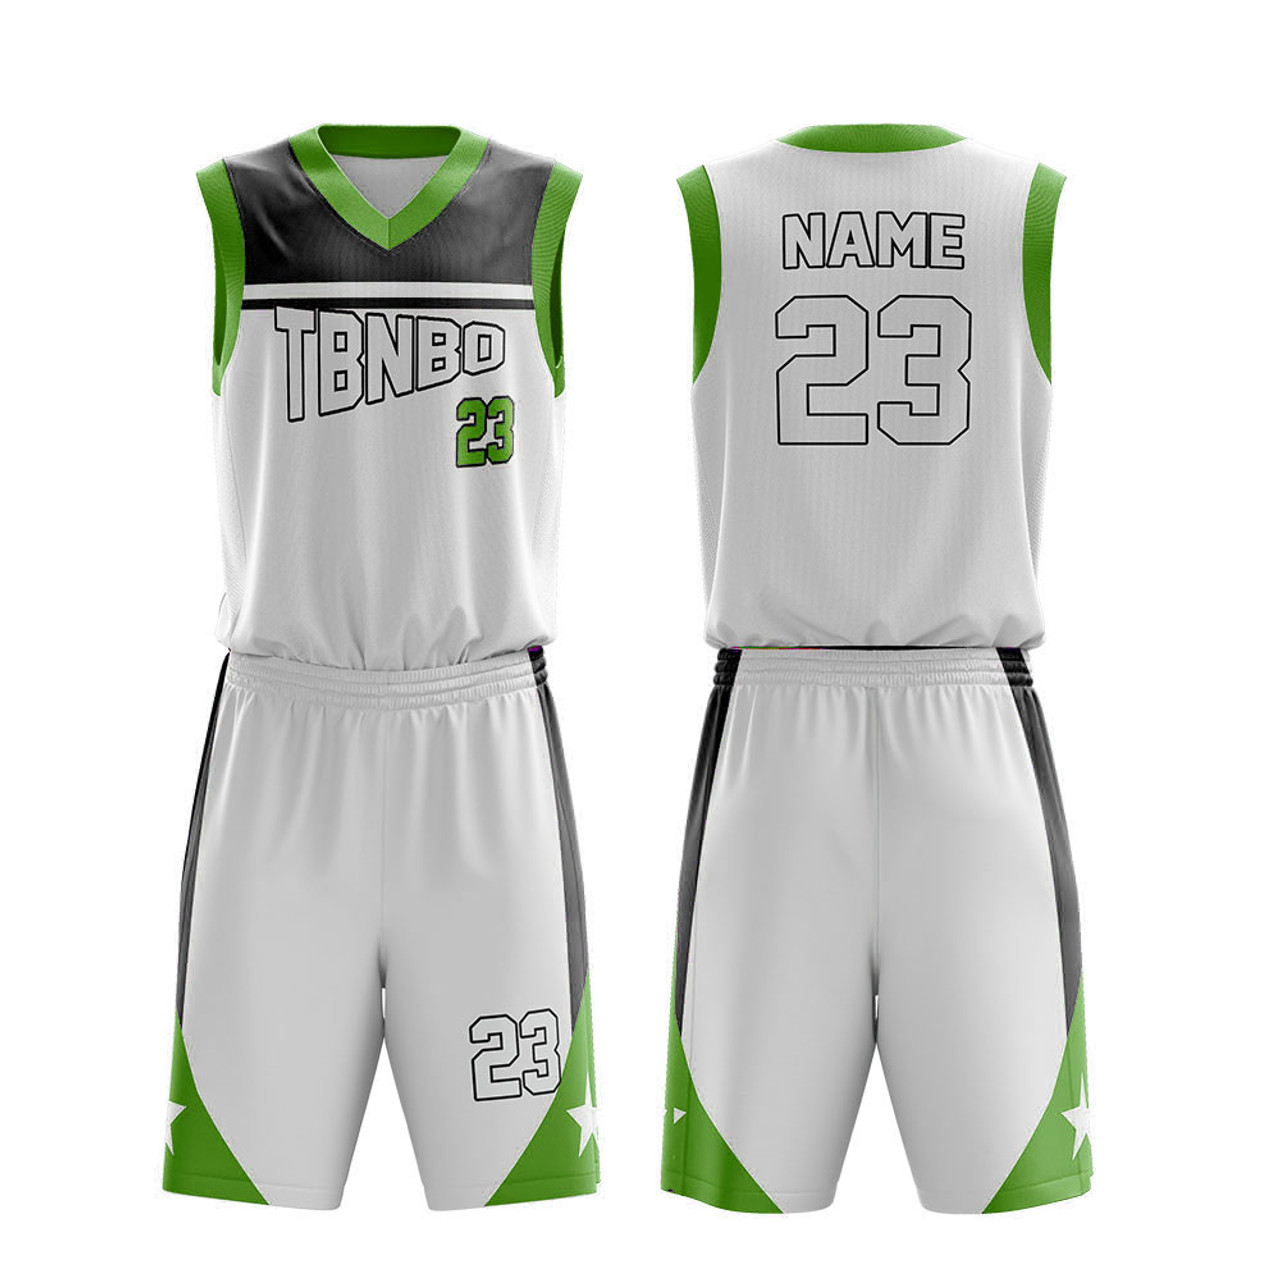 High Quality White Basketball Jersey Design Customized Name And Number ...